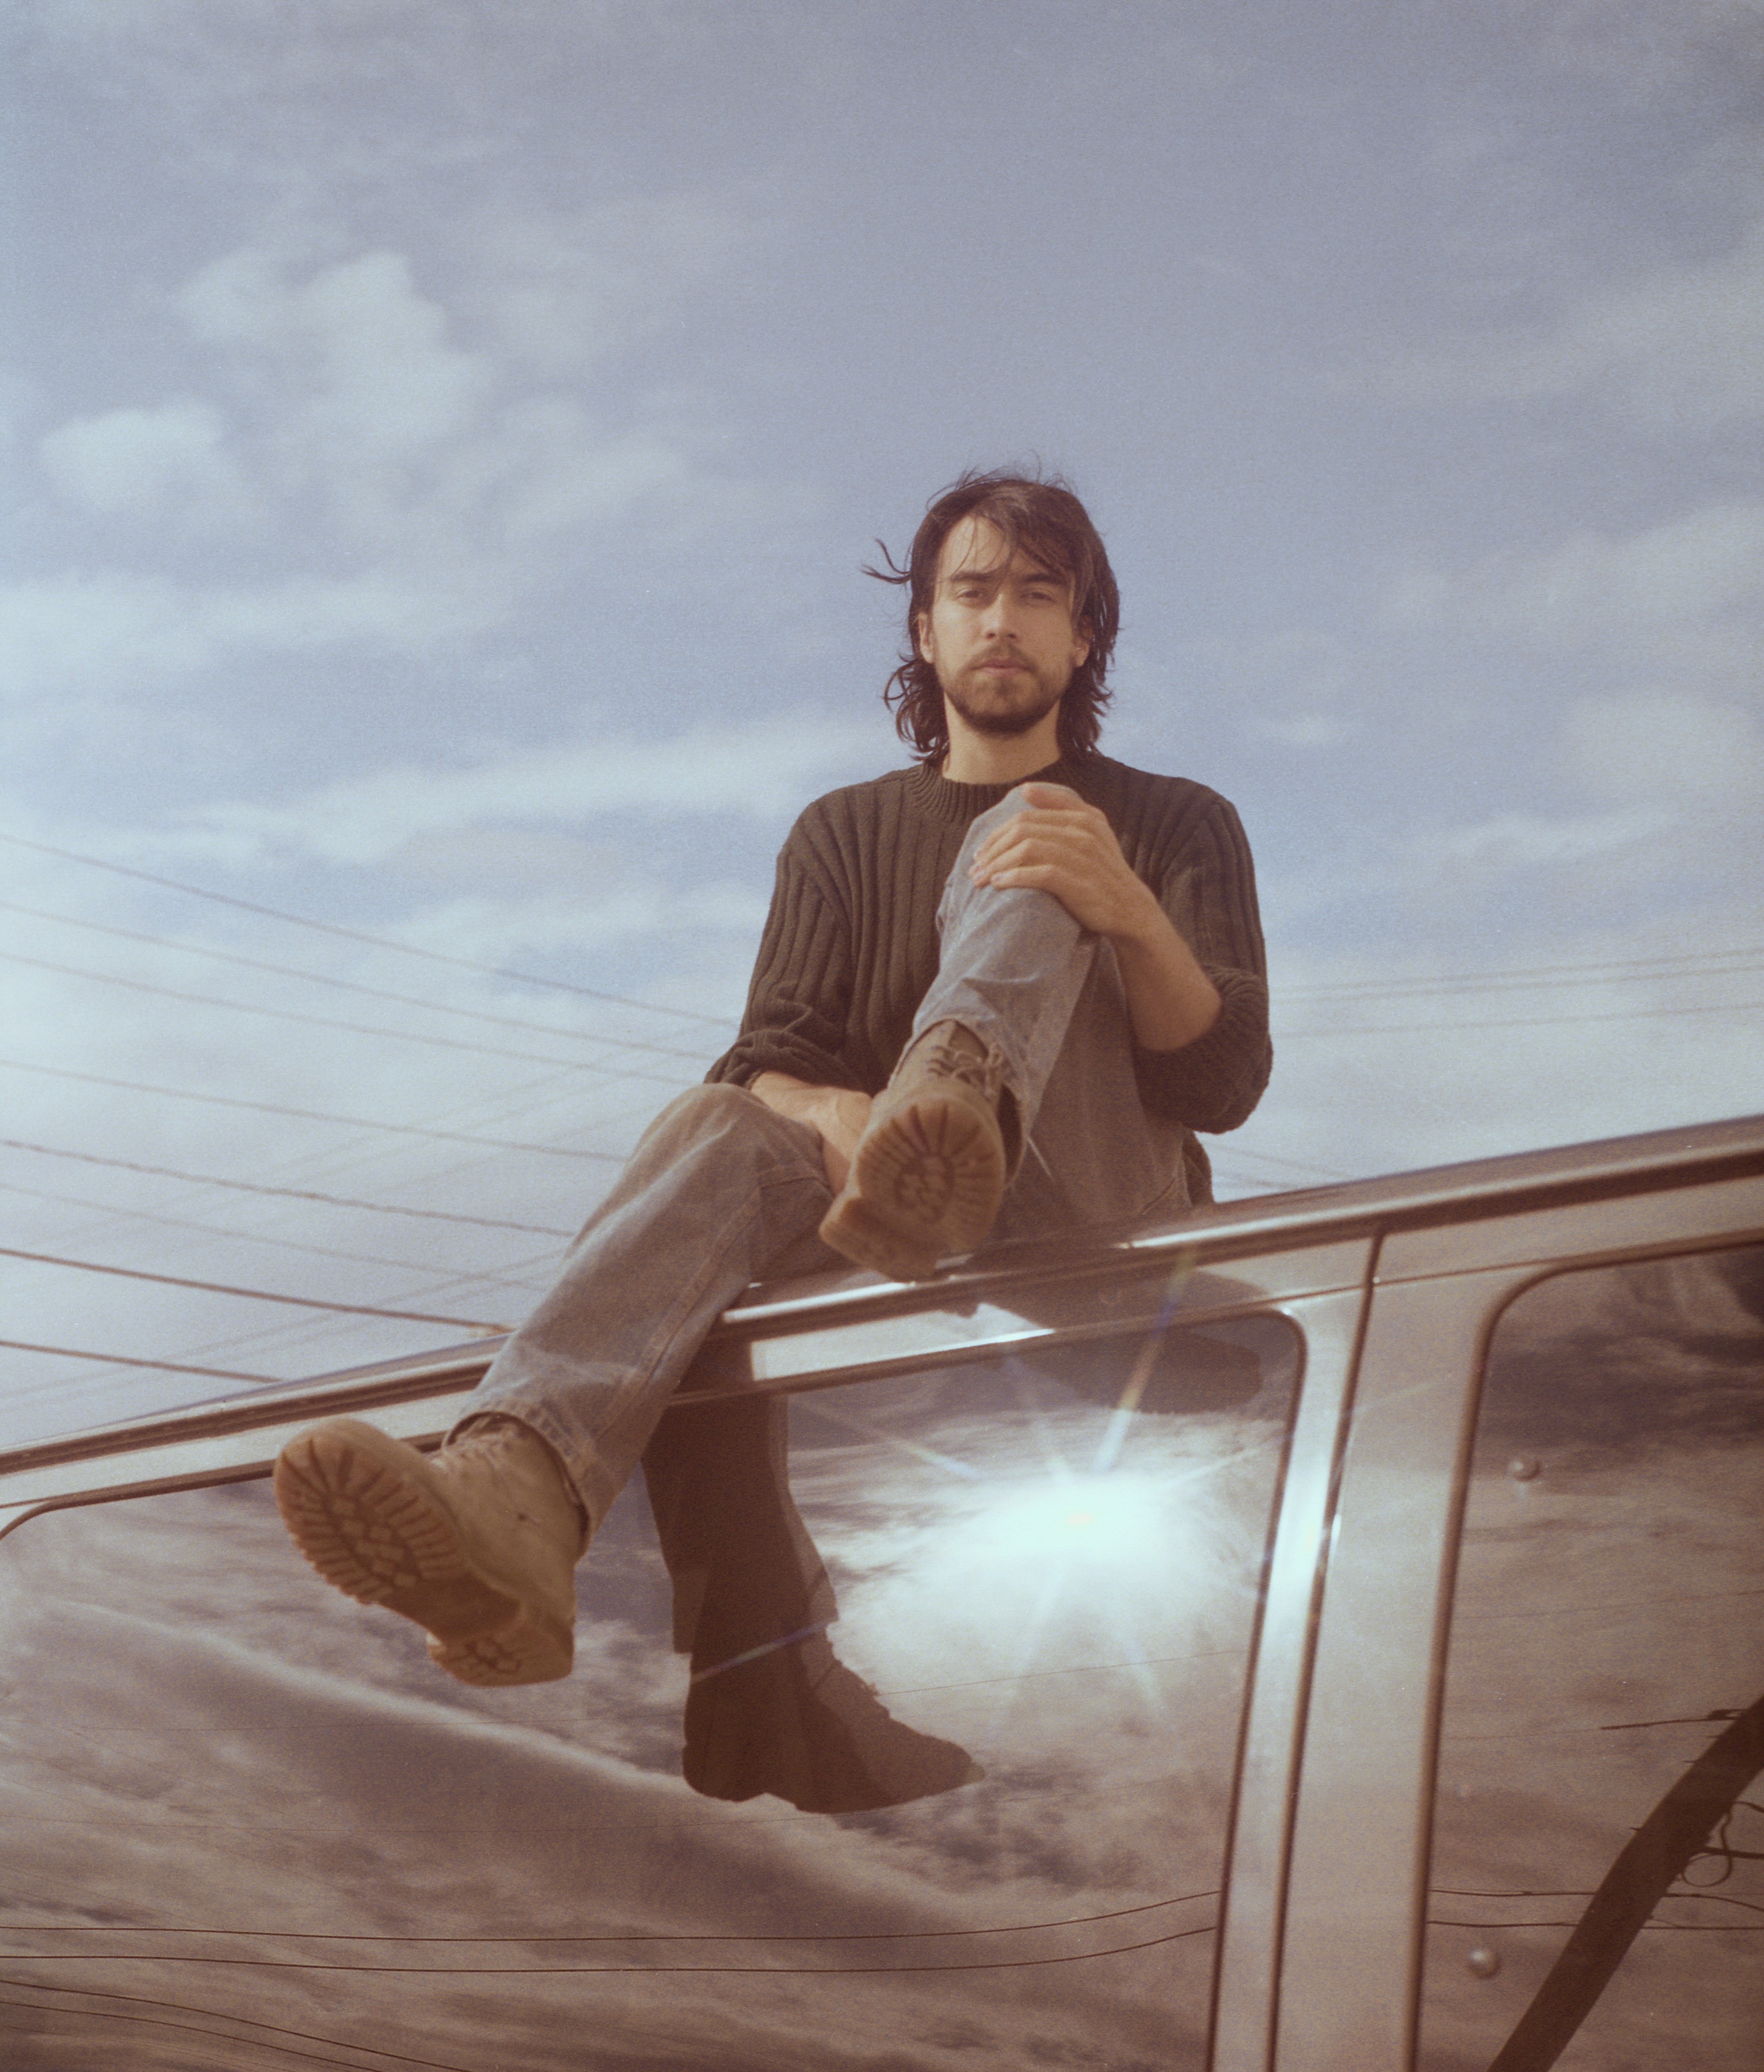 Buy Tickets to Alex G at Skully's in Columbus on Nov 21, 2021